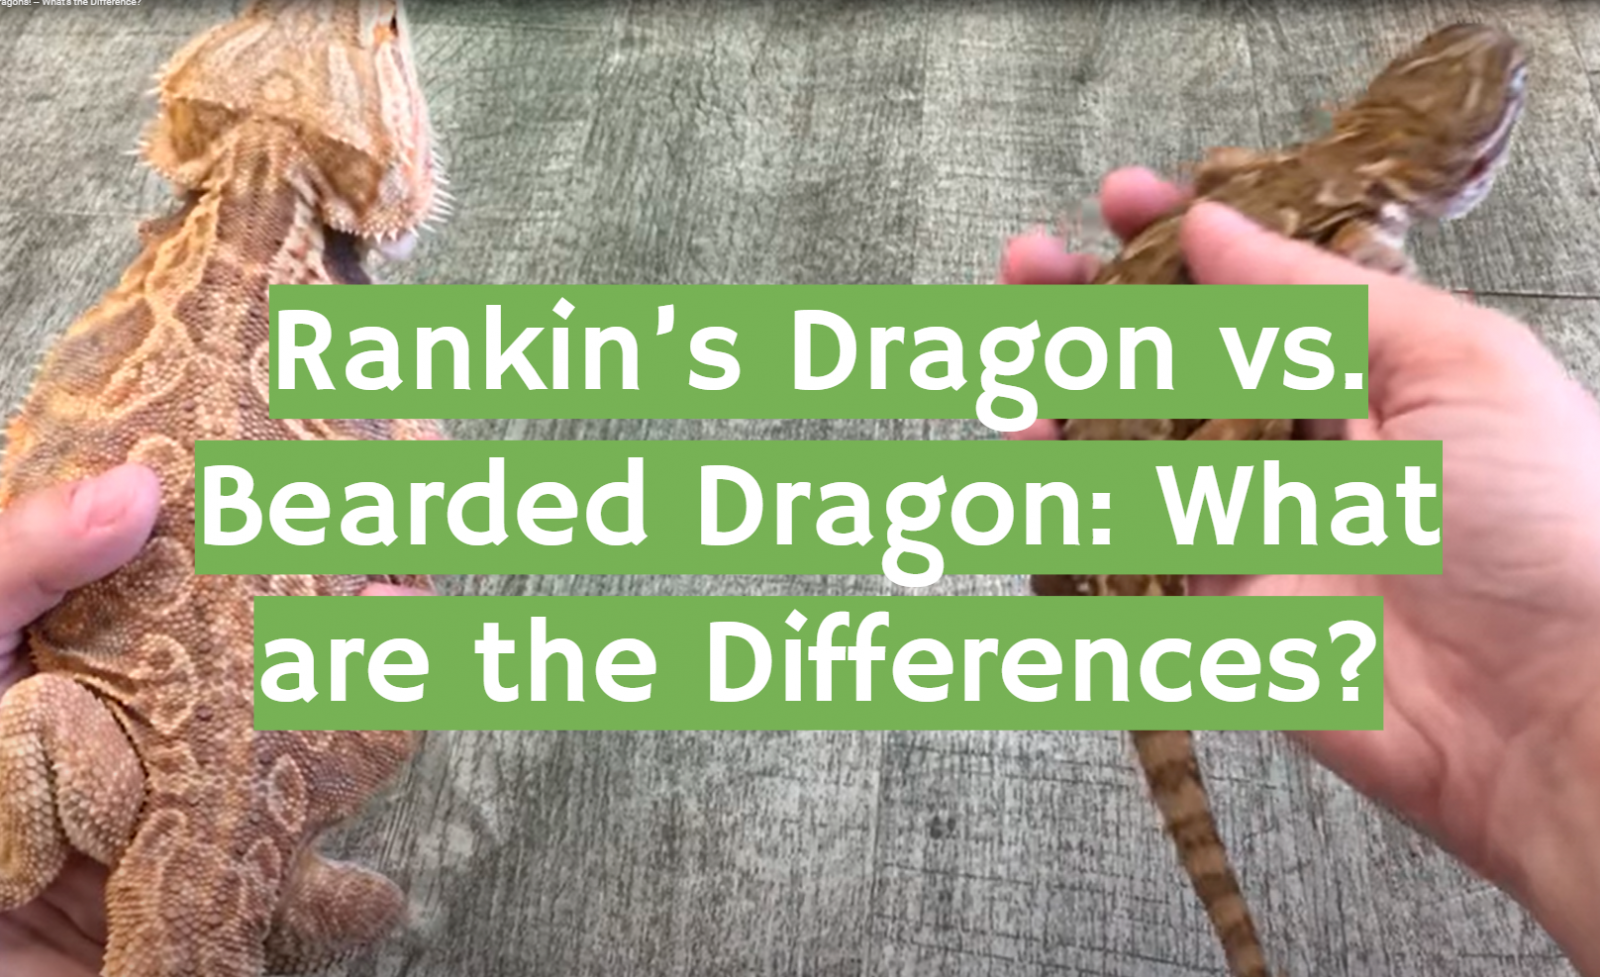 Rankin’s Dragon vs. Bearded Dragon: What are the Differences?